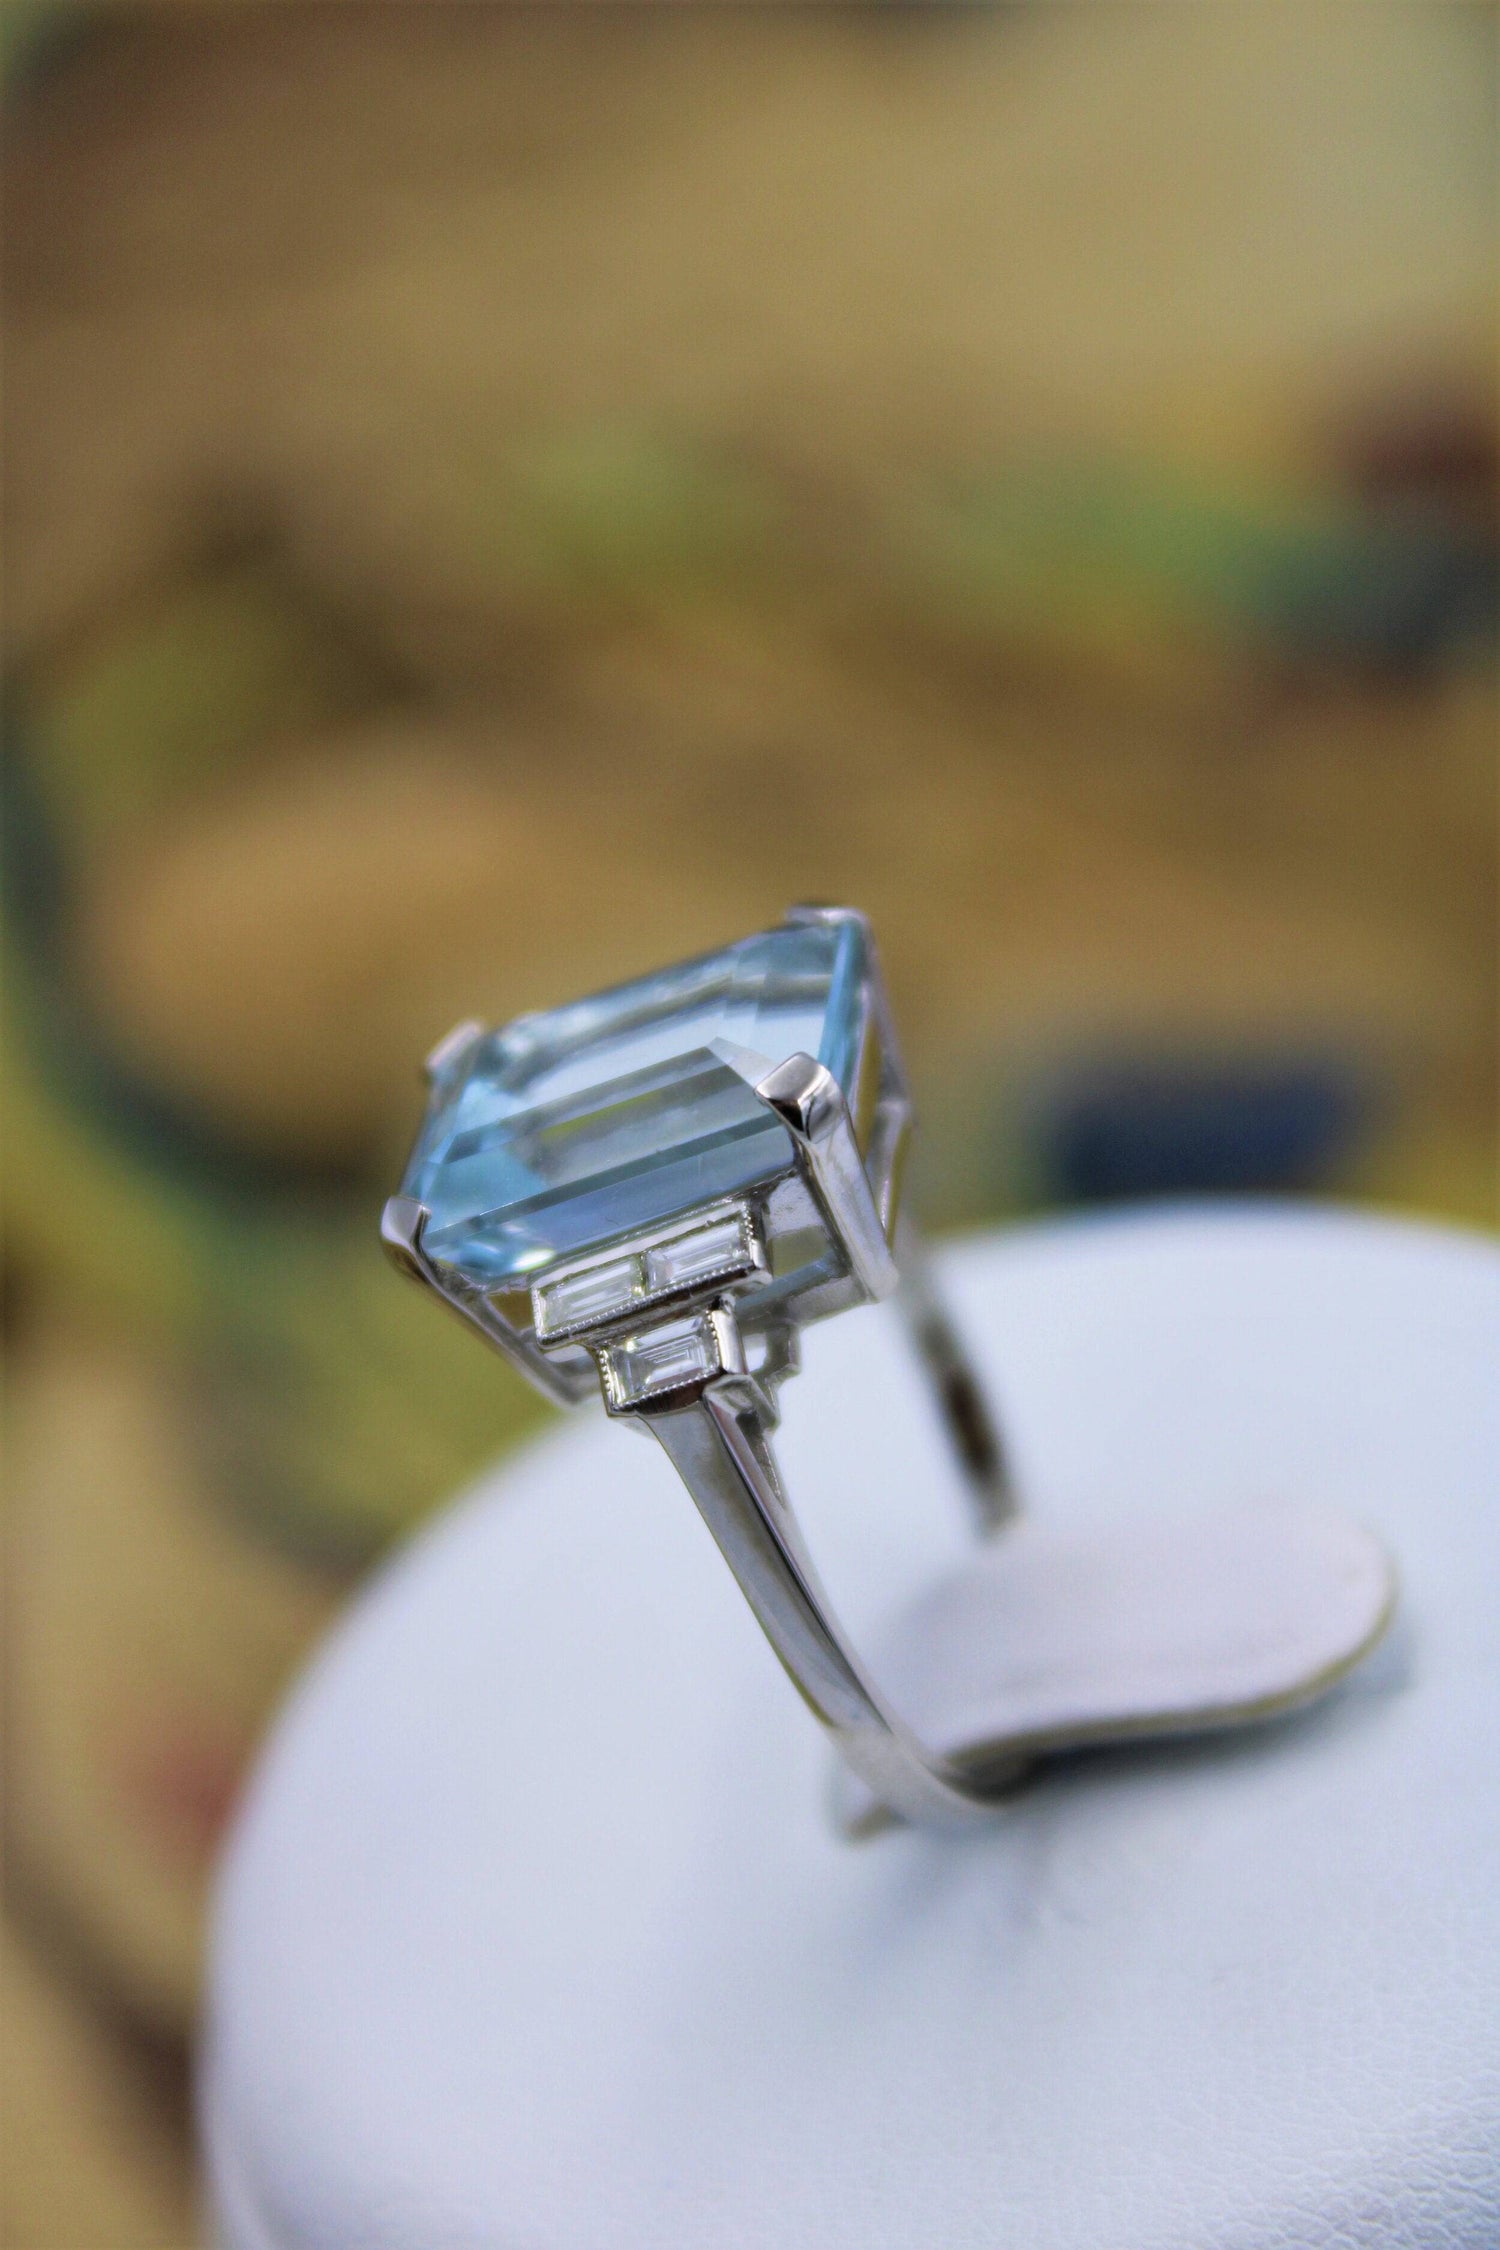 A very beautiful Platinum (marked) Aquamarine of approximately 8 Carats and Diamond stepped shouldered Ring, Mid 20th Century. - Robin Haydock Antiques